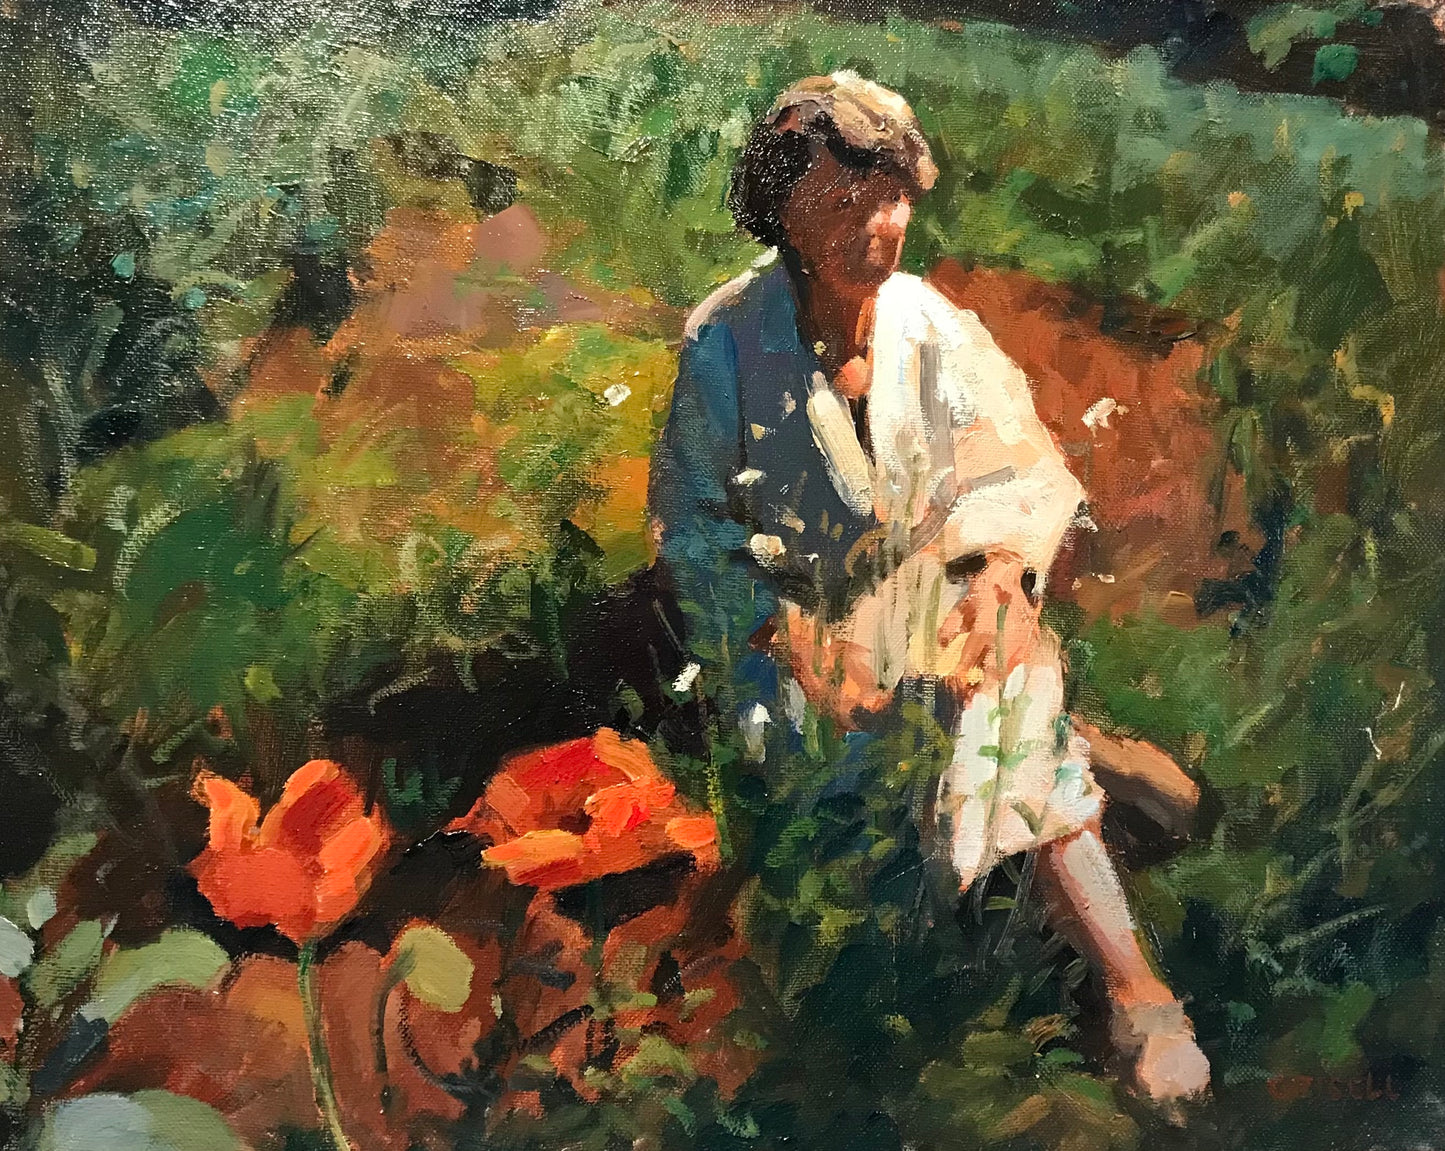 Ruth and Poppies (16 x 20 Inches)